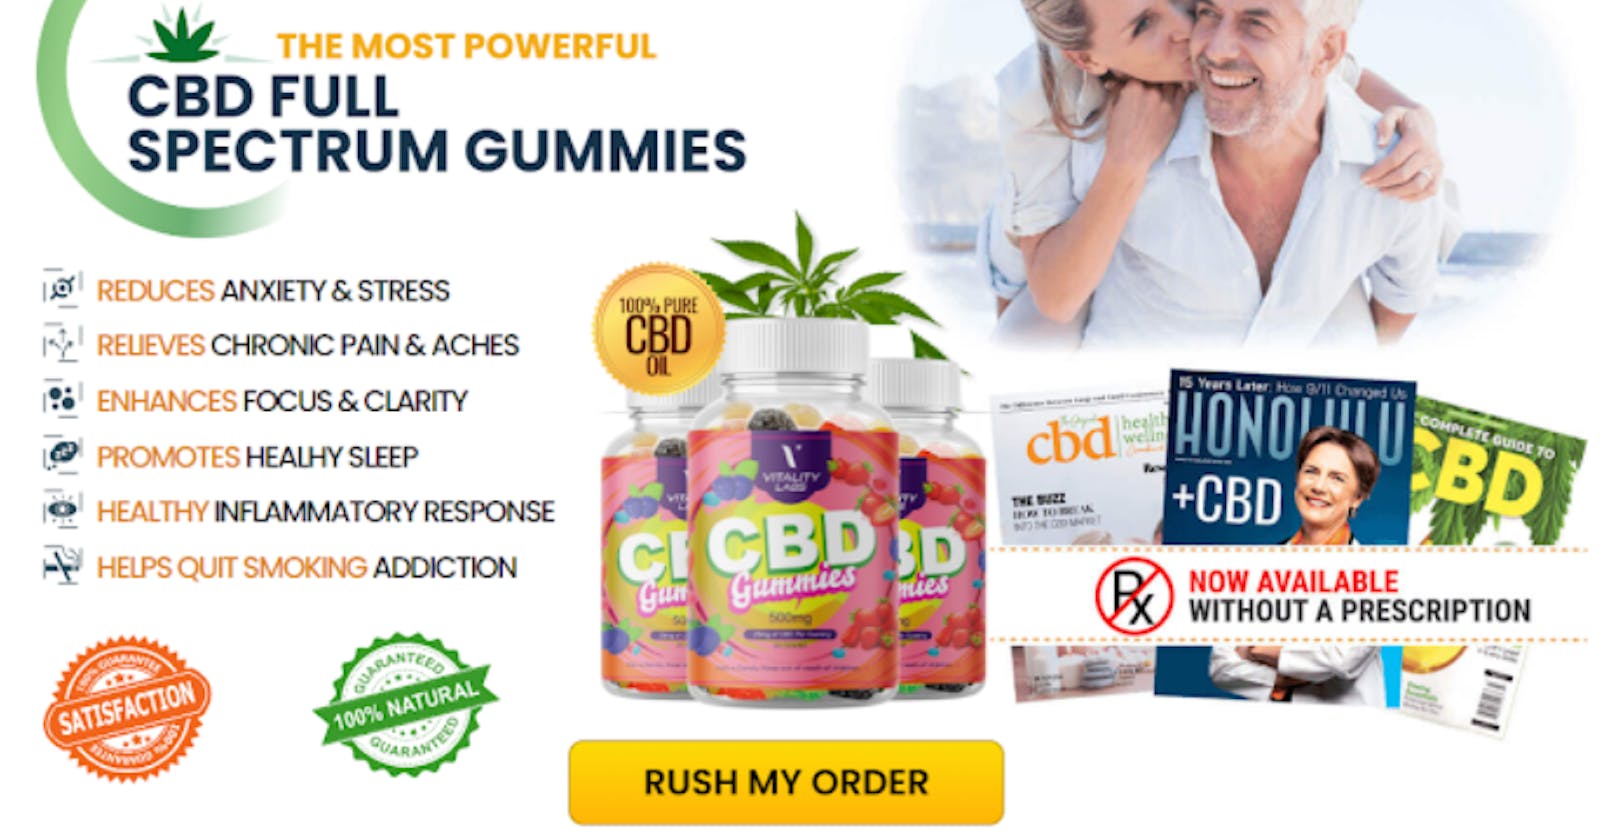 Vitality Labs CBD Gummies Reviews, Price, For Sale, Near Me, Website, Ingredients, Scam & Where To Buy?